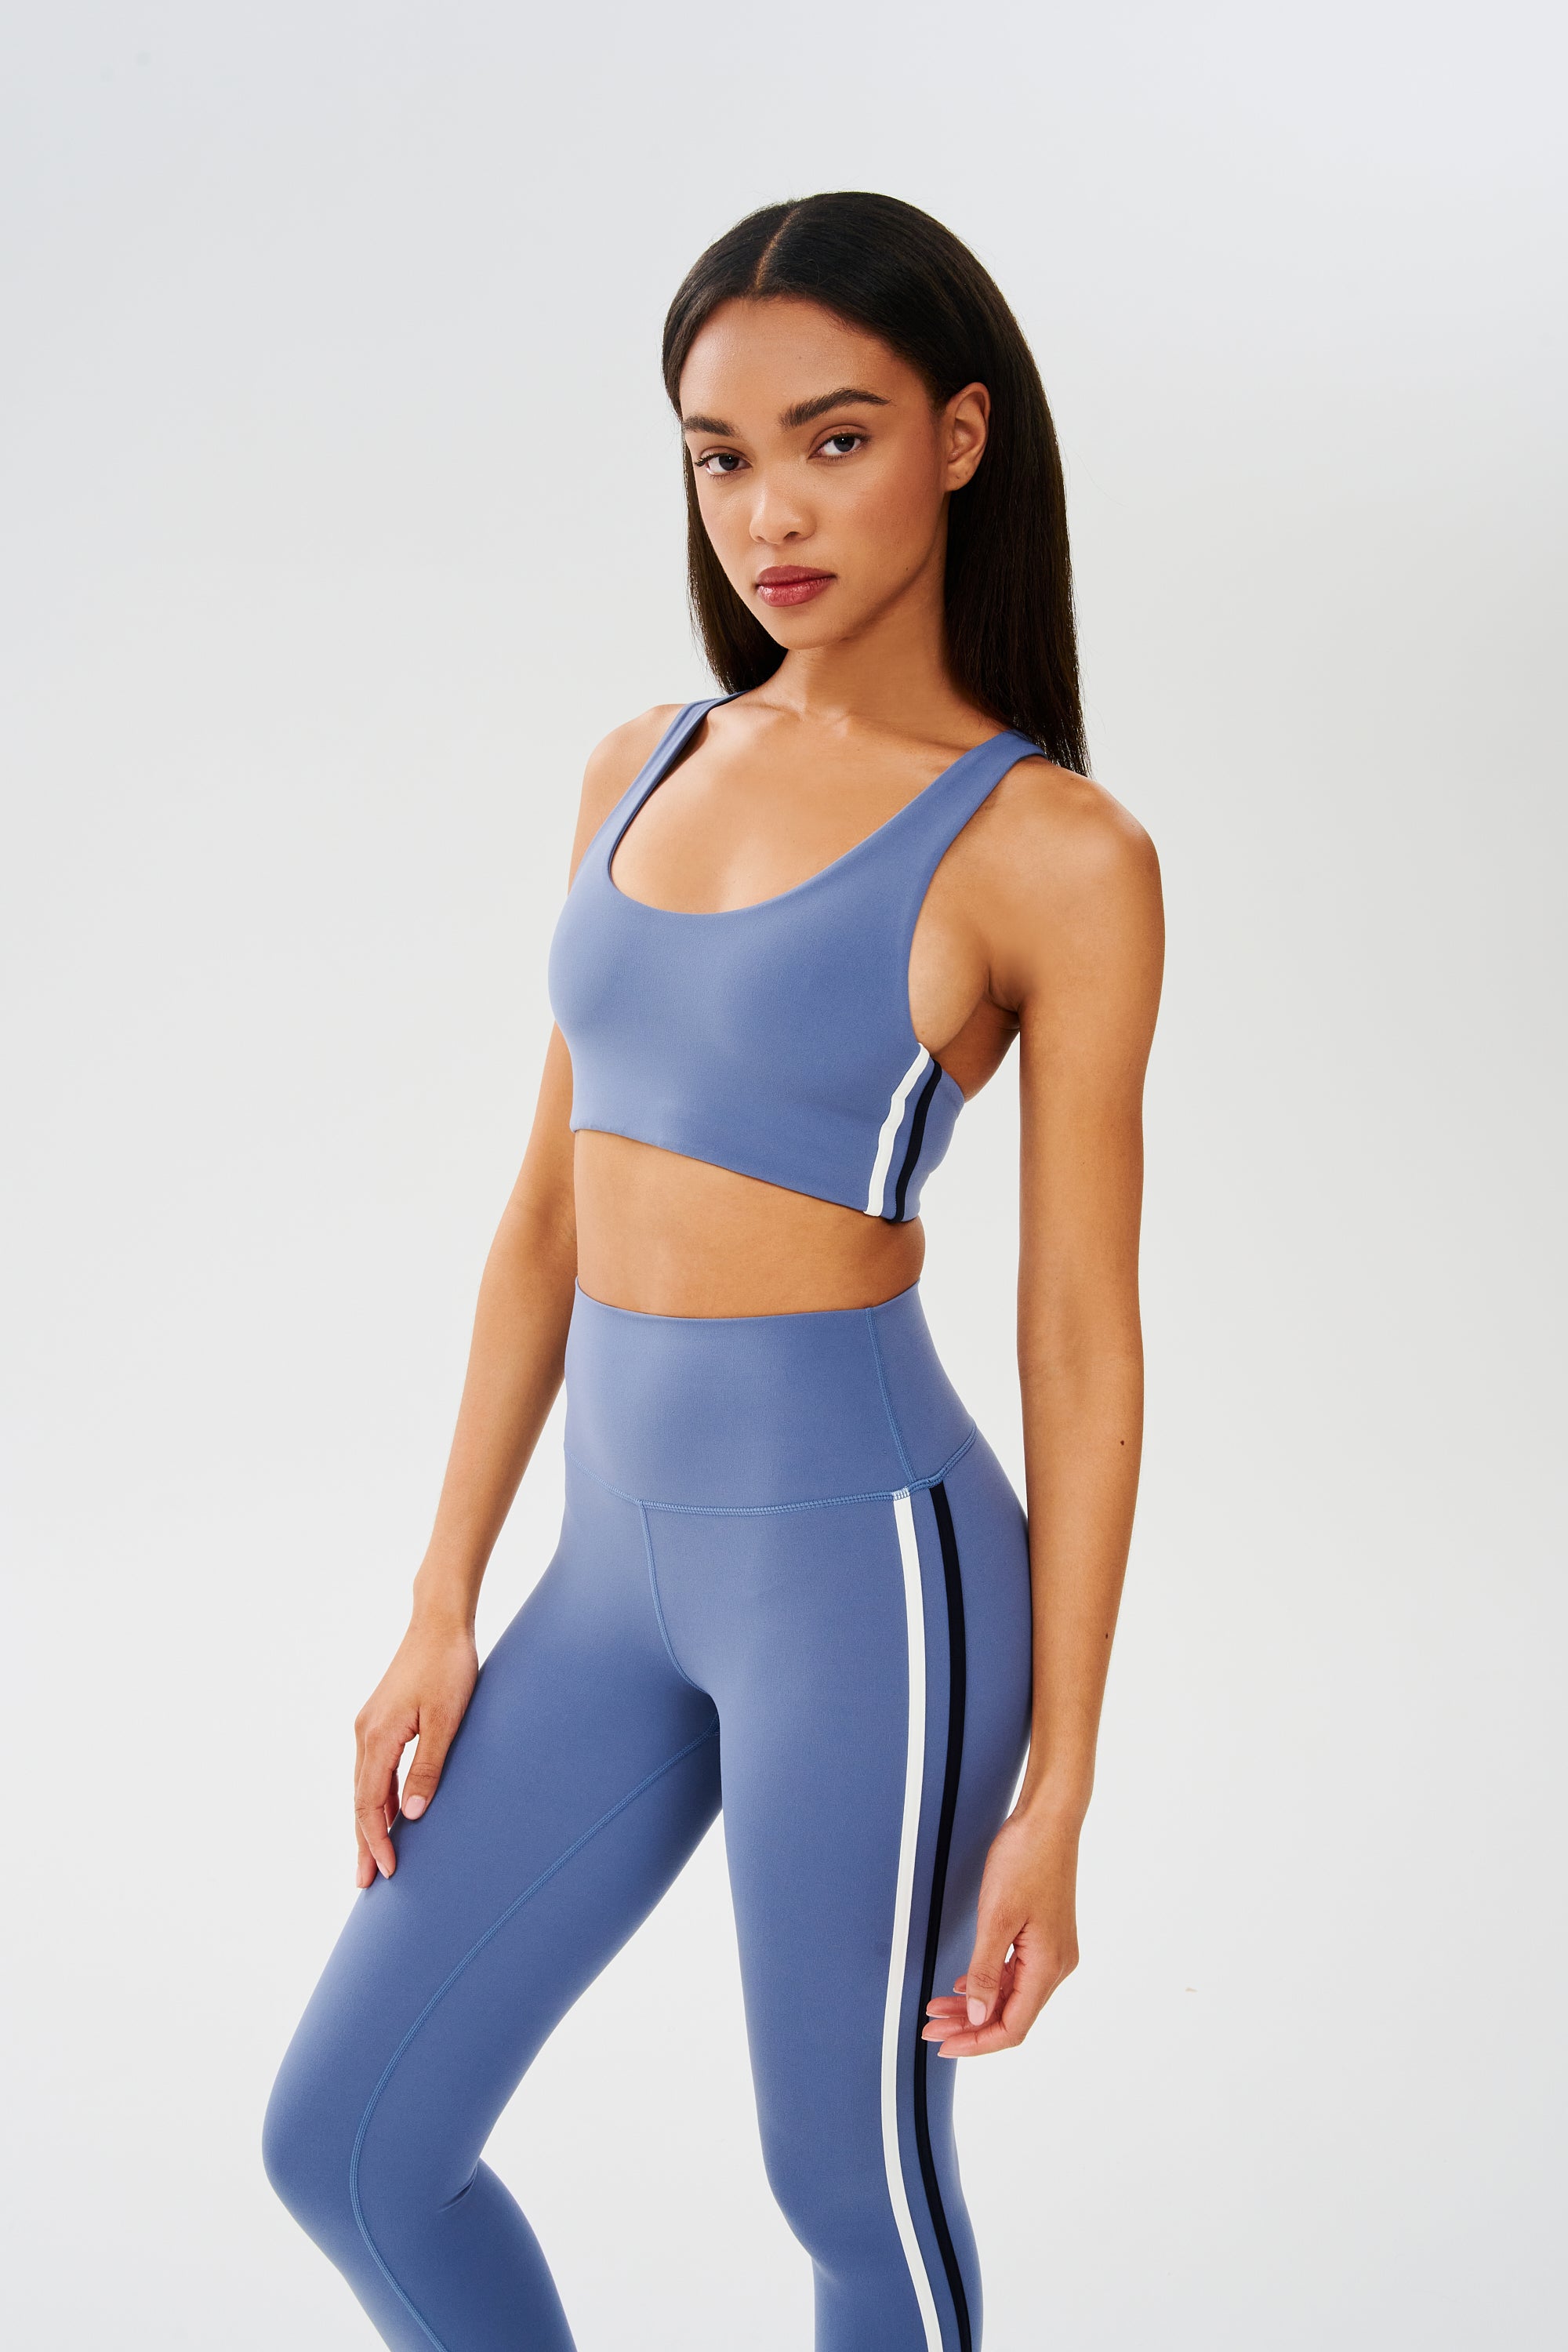 Comfortable And Flared Full Length Splits59 Flare Leggings For Women Ideal  For Running, Yoga, And Fitness In 2023 From Jackwang777, $63.32